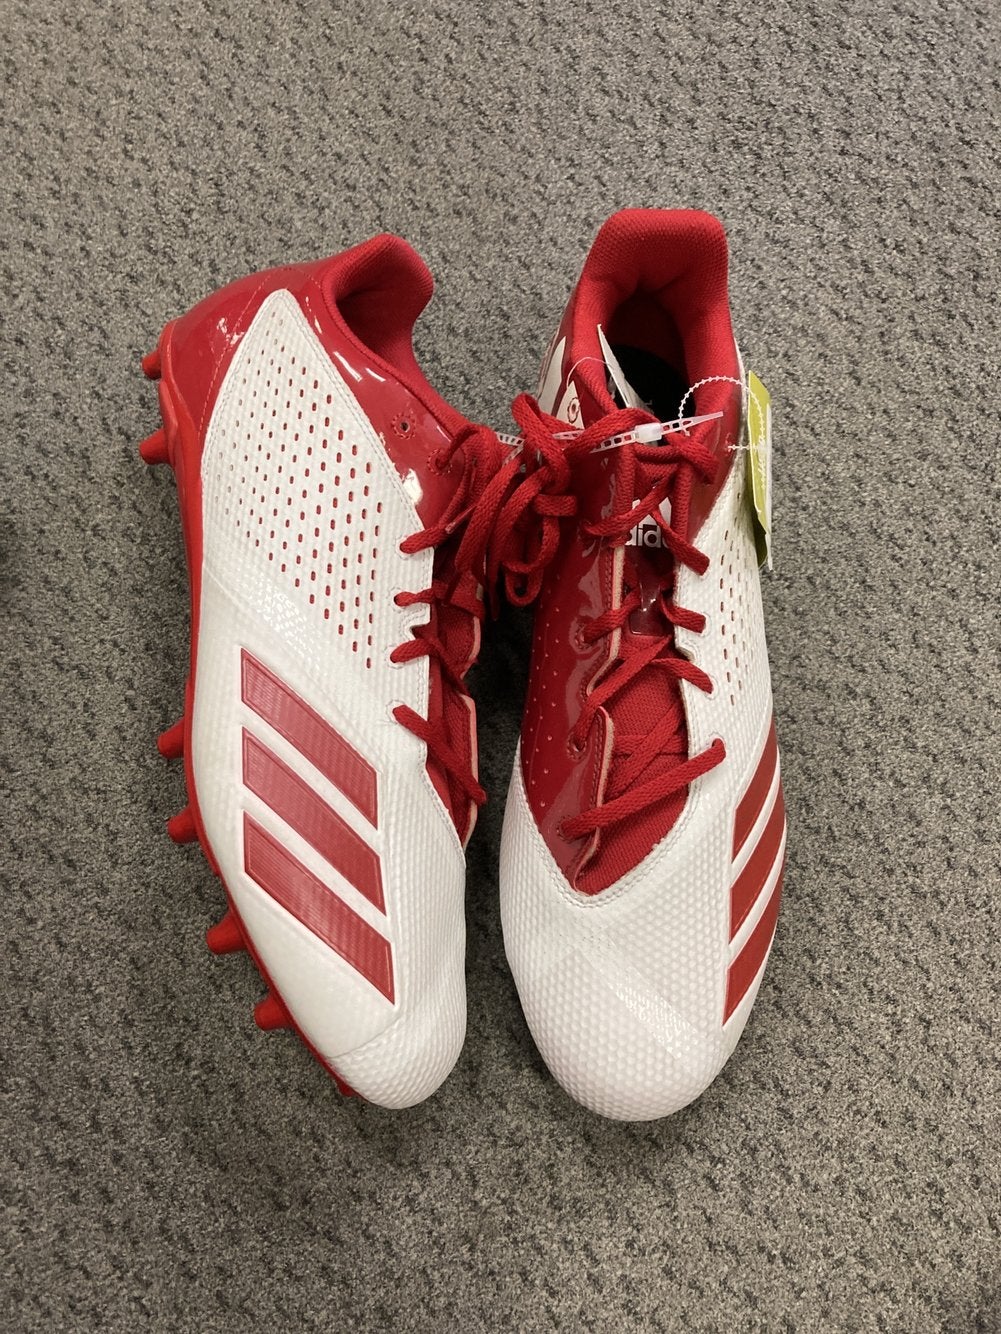 Adidas “Fabulous Las Vegas” Special Edition Cleats | SidelineSwap